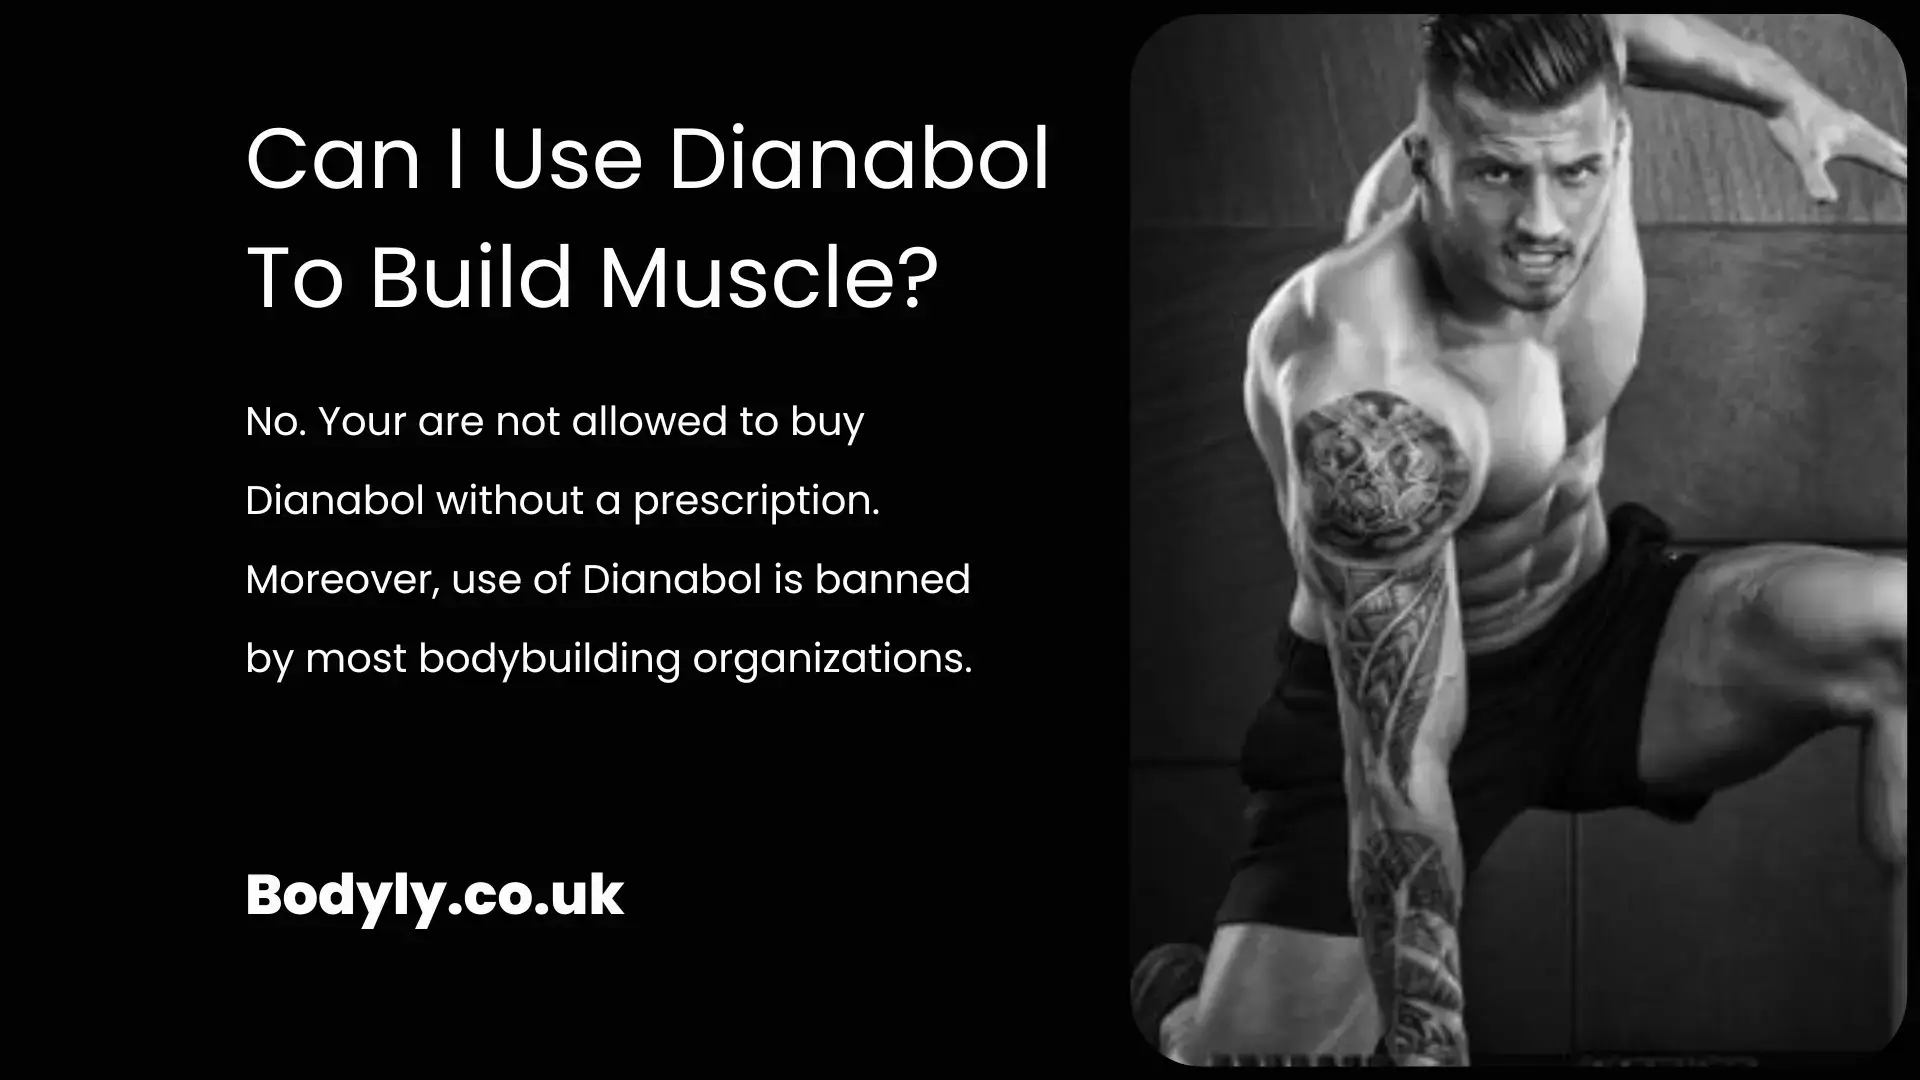 Is dianabol legal in the UK?